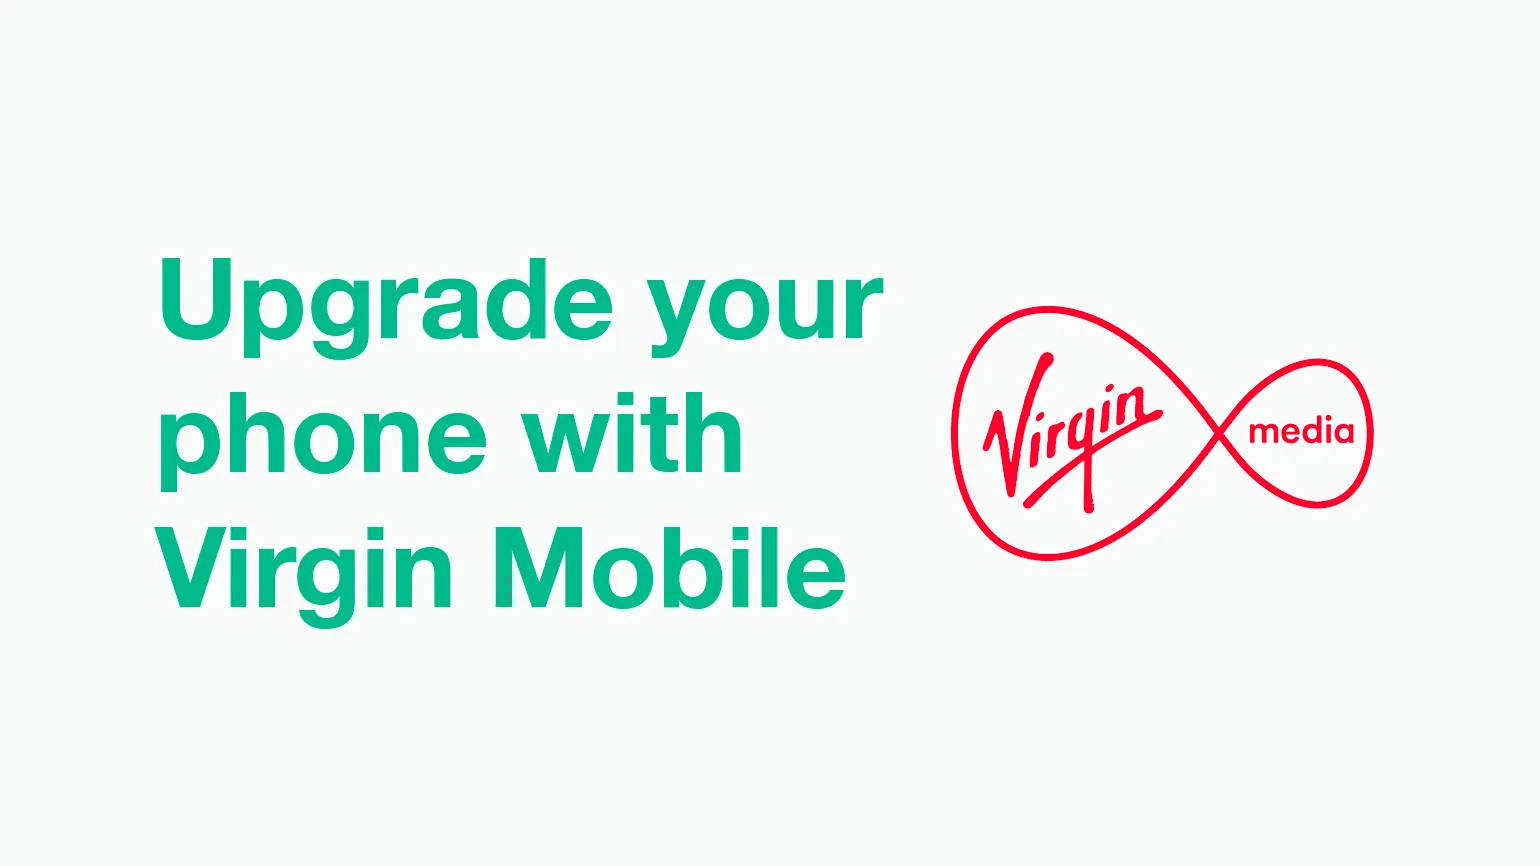 Upgrading your phone on Virgin Mobile